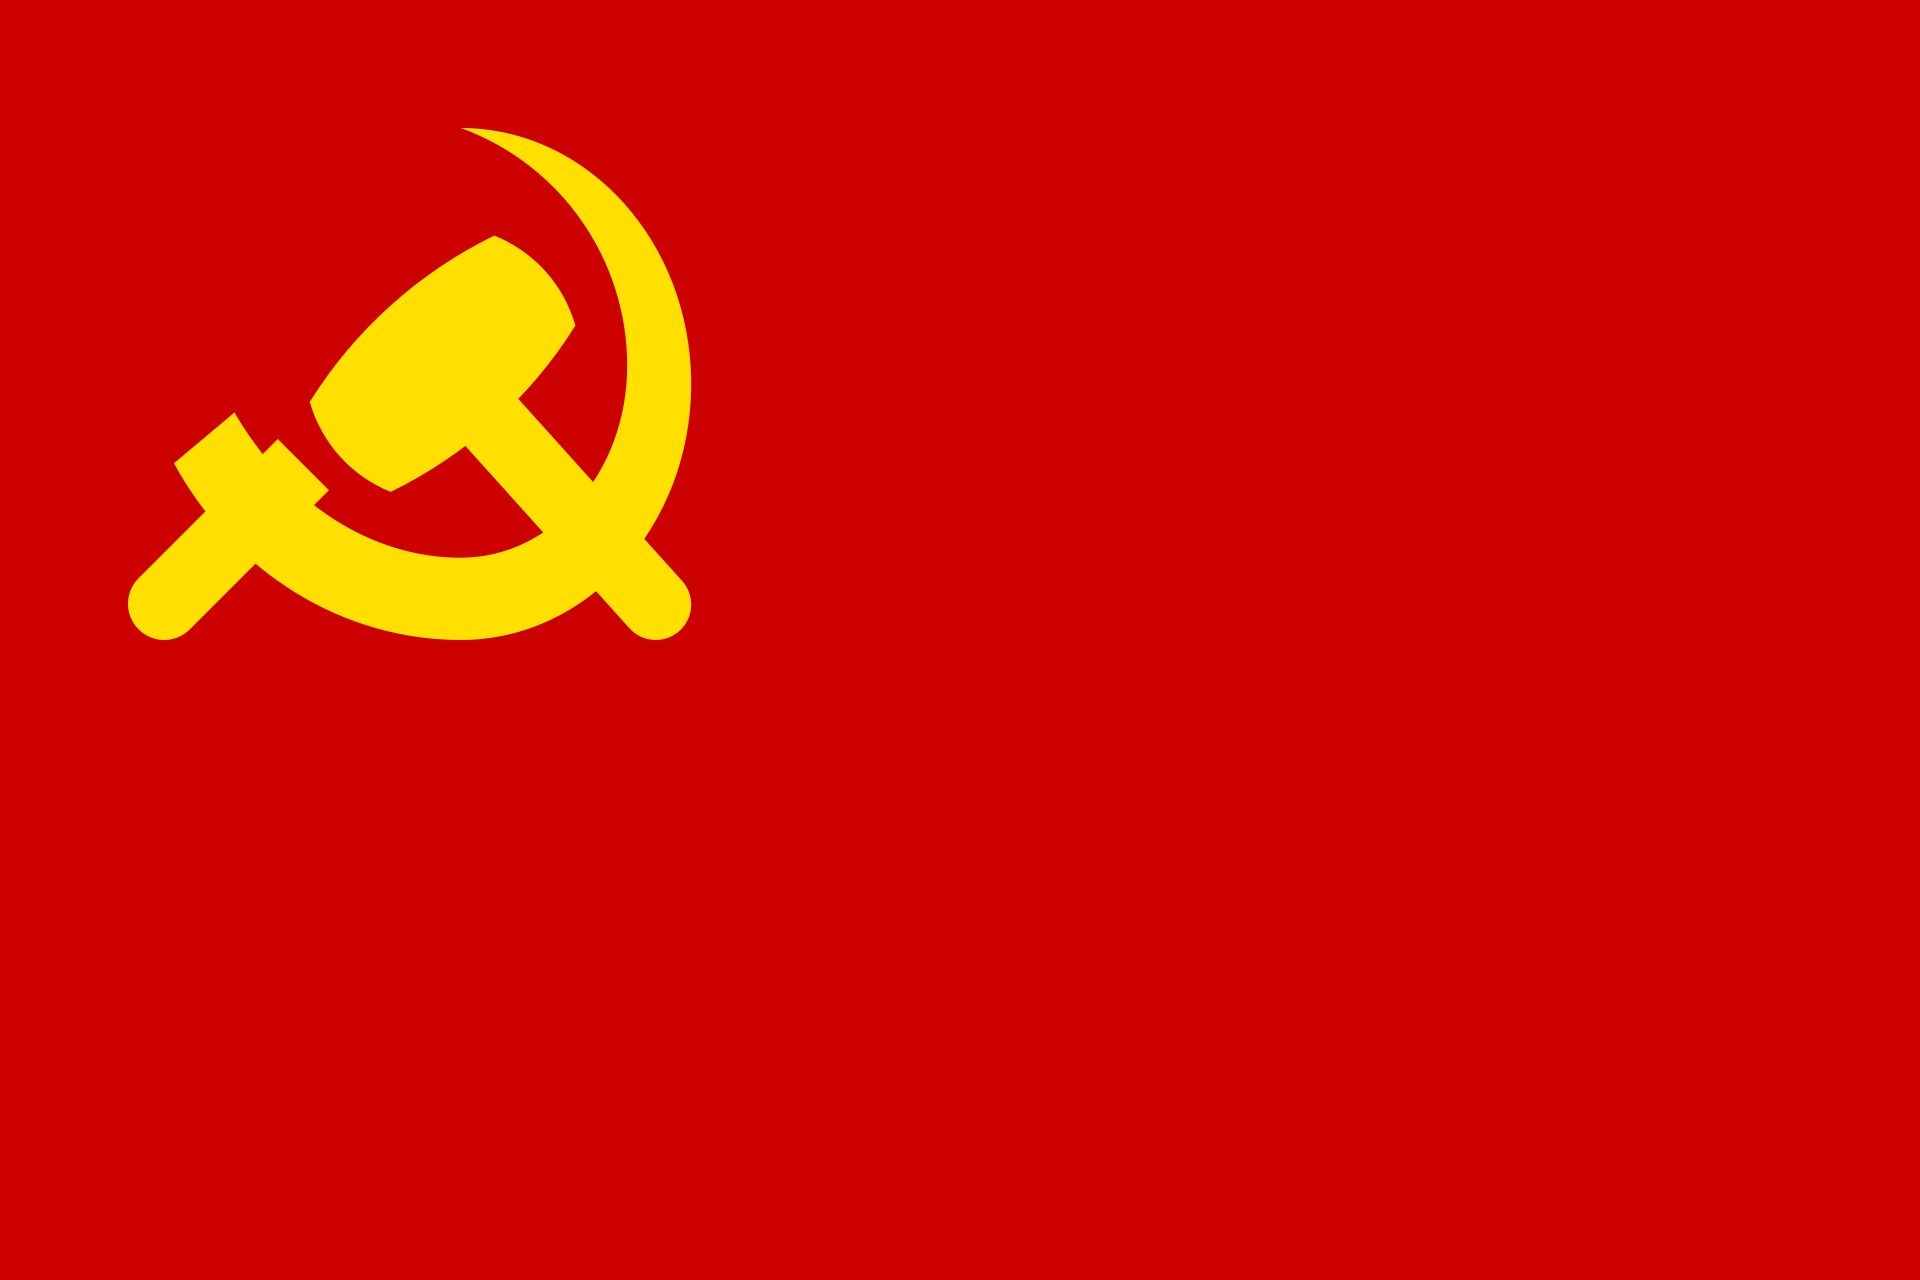 File:Flag of the Shining Path.png